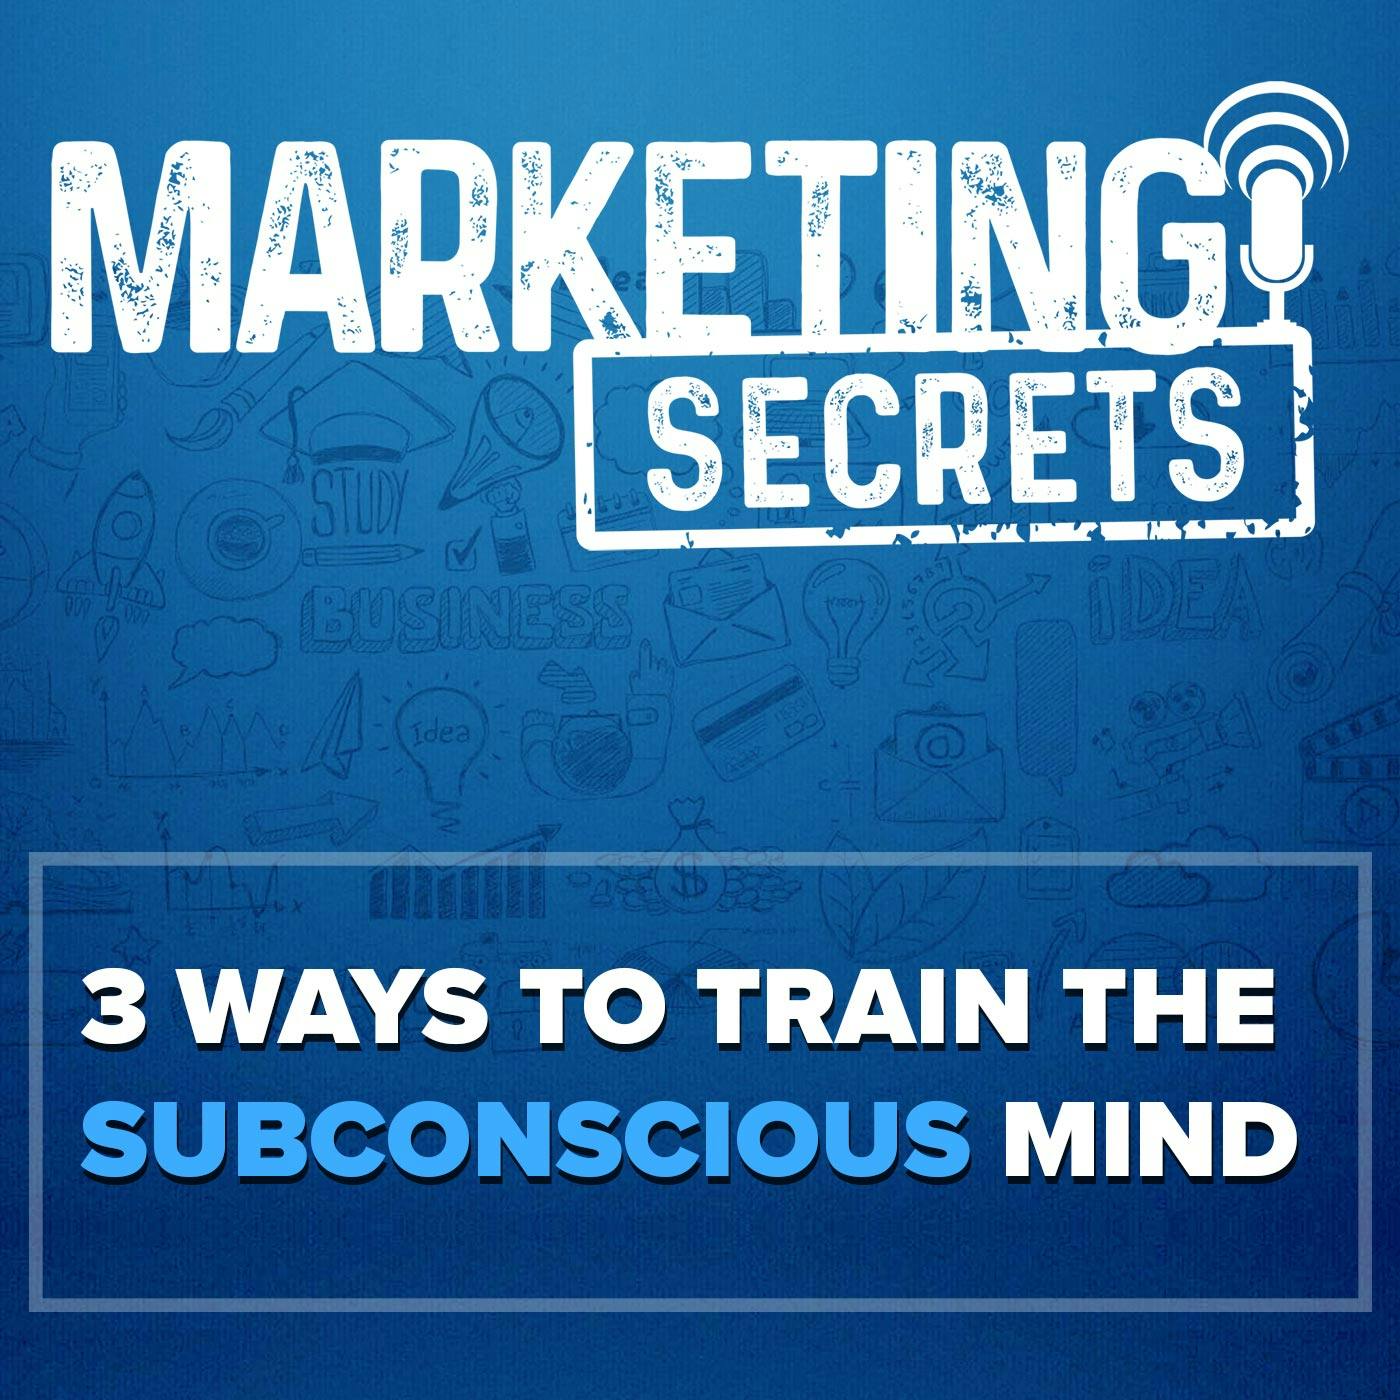 3 Ways to Train the Subconscious Mind by Russell Brunson